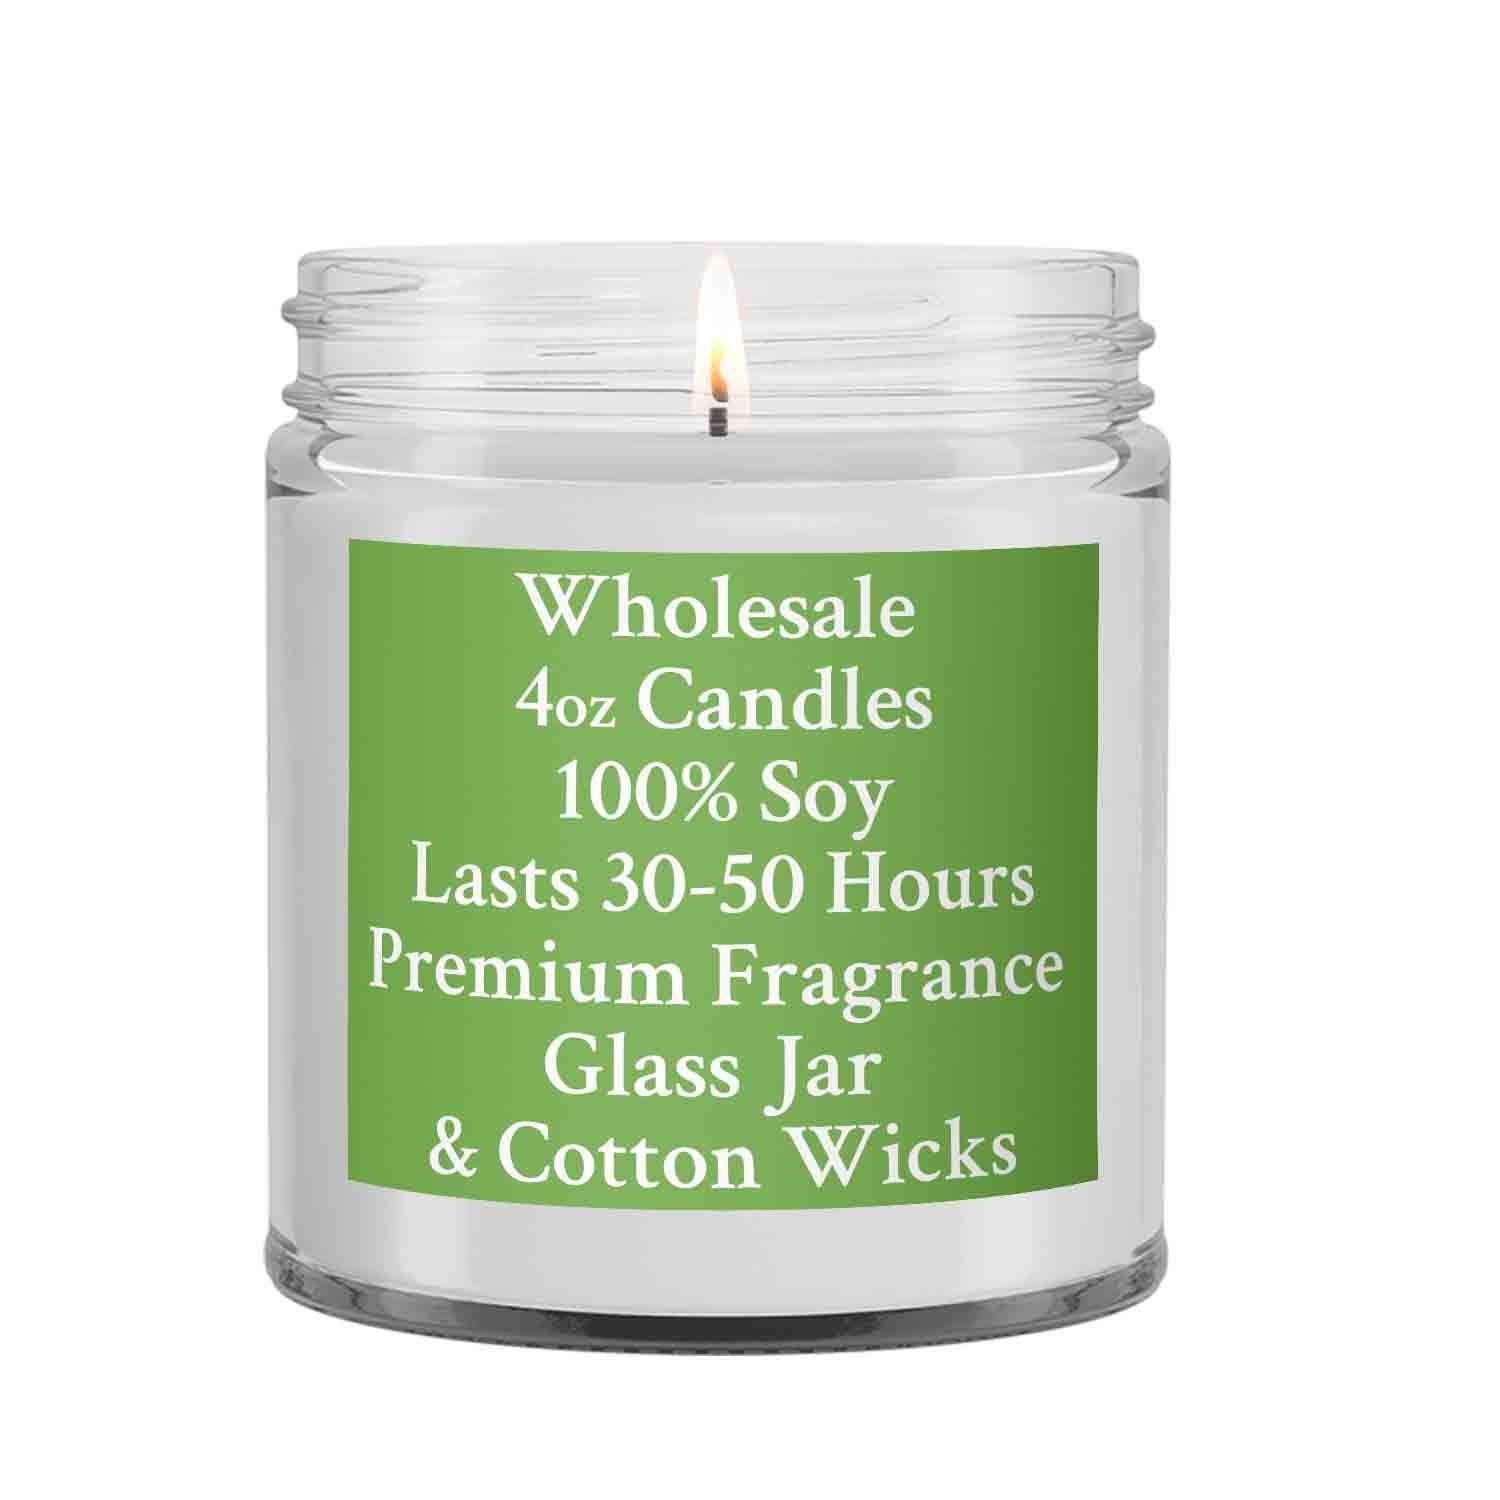 Exceptionally Strong Soy Candles! Highly Scented Soy Candles!